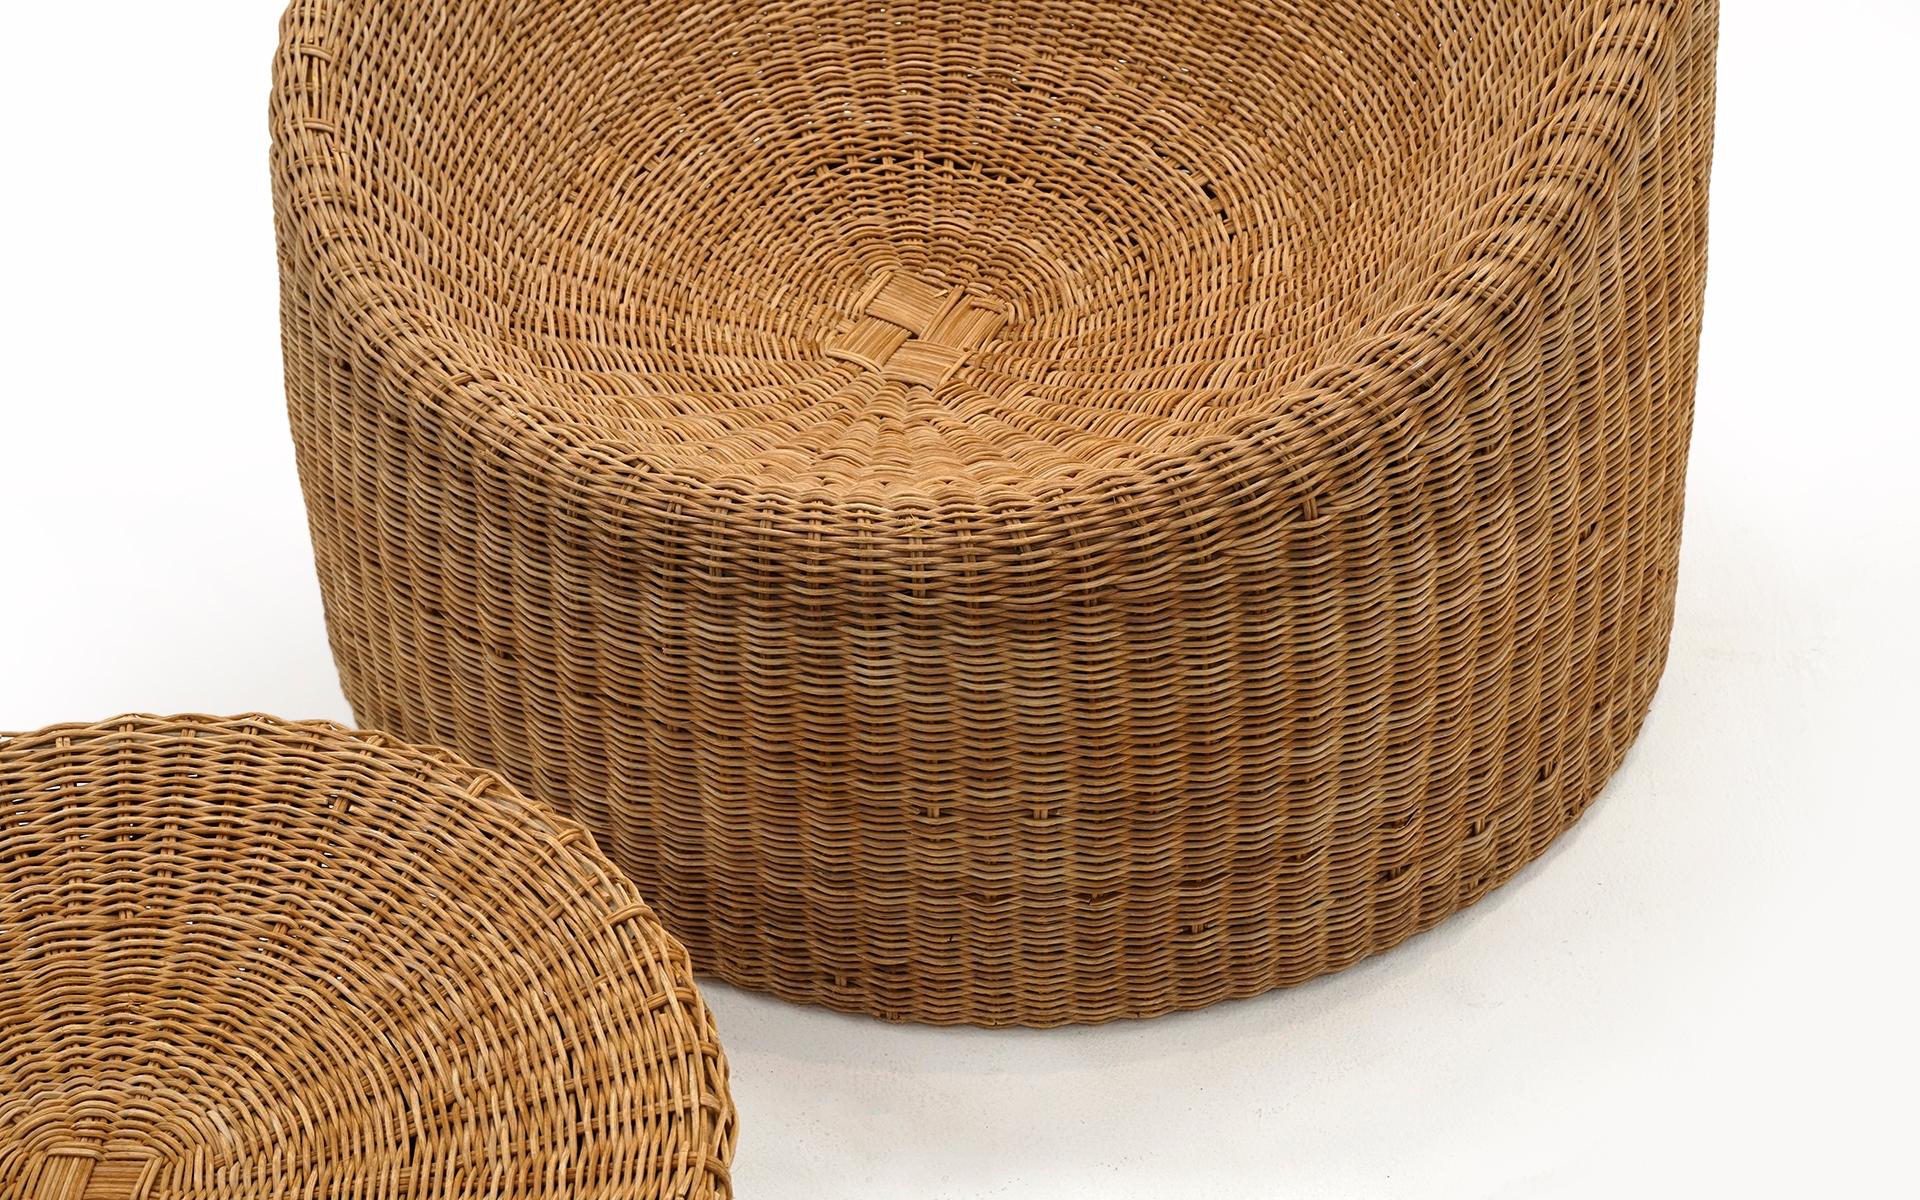 Mid-20th Century Wicker Chair and Ottoman by Eero Aarnio, Finland, 1960s